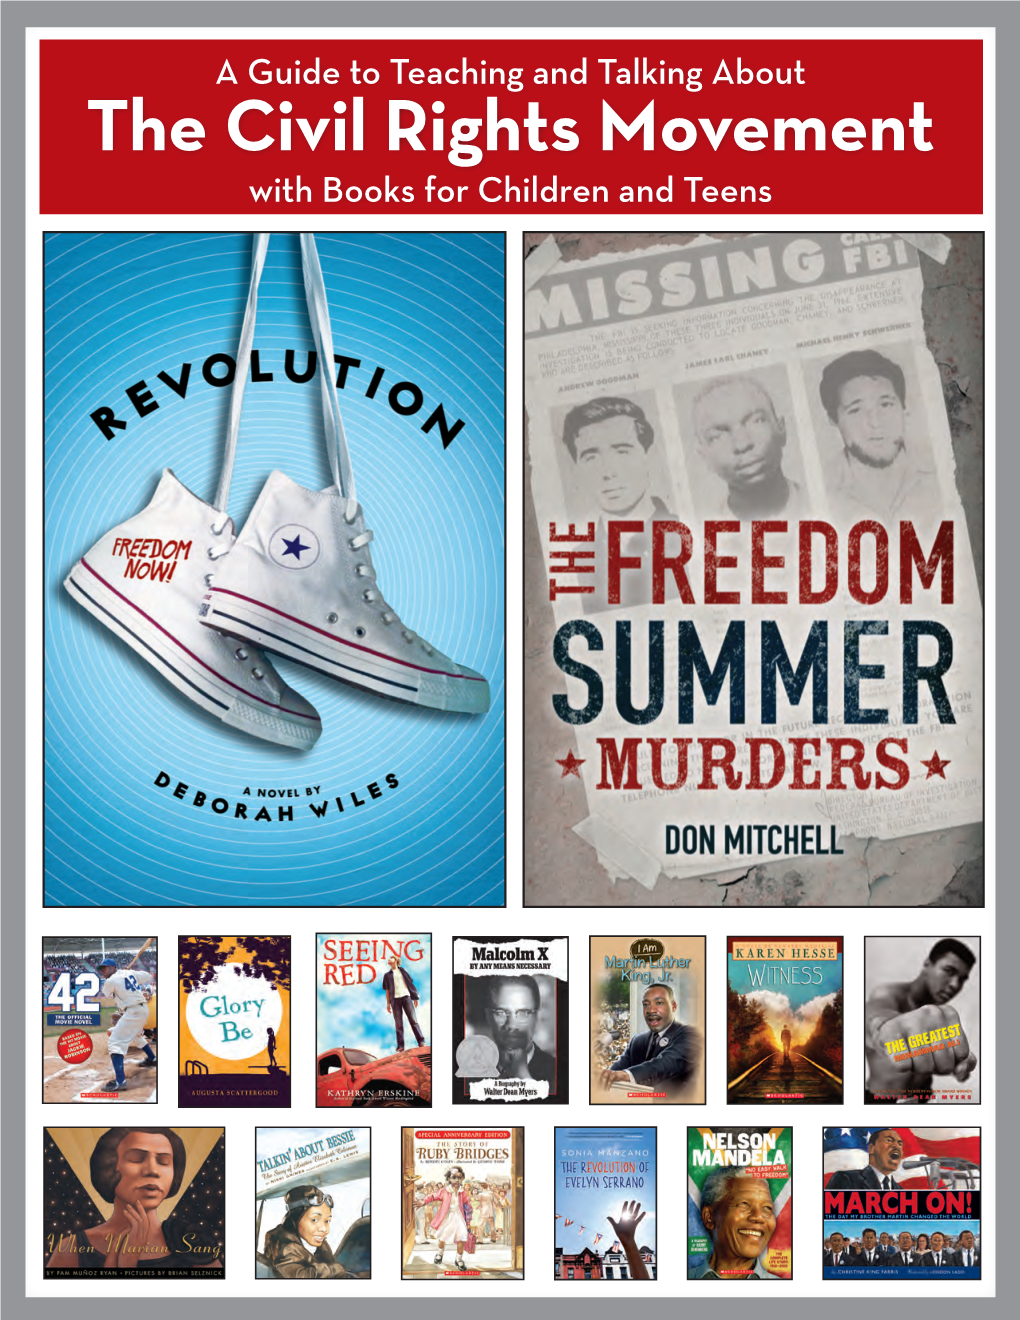 Civil Rights Movement with Books for Children and Teens the Sixties Trilogy by Deborah Wiles